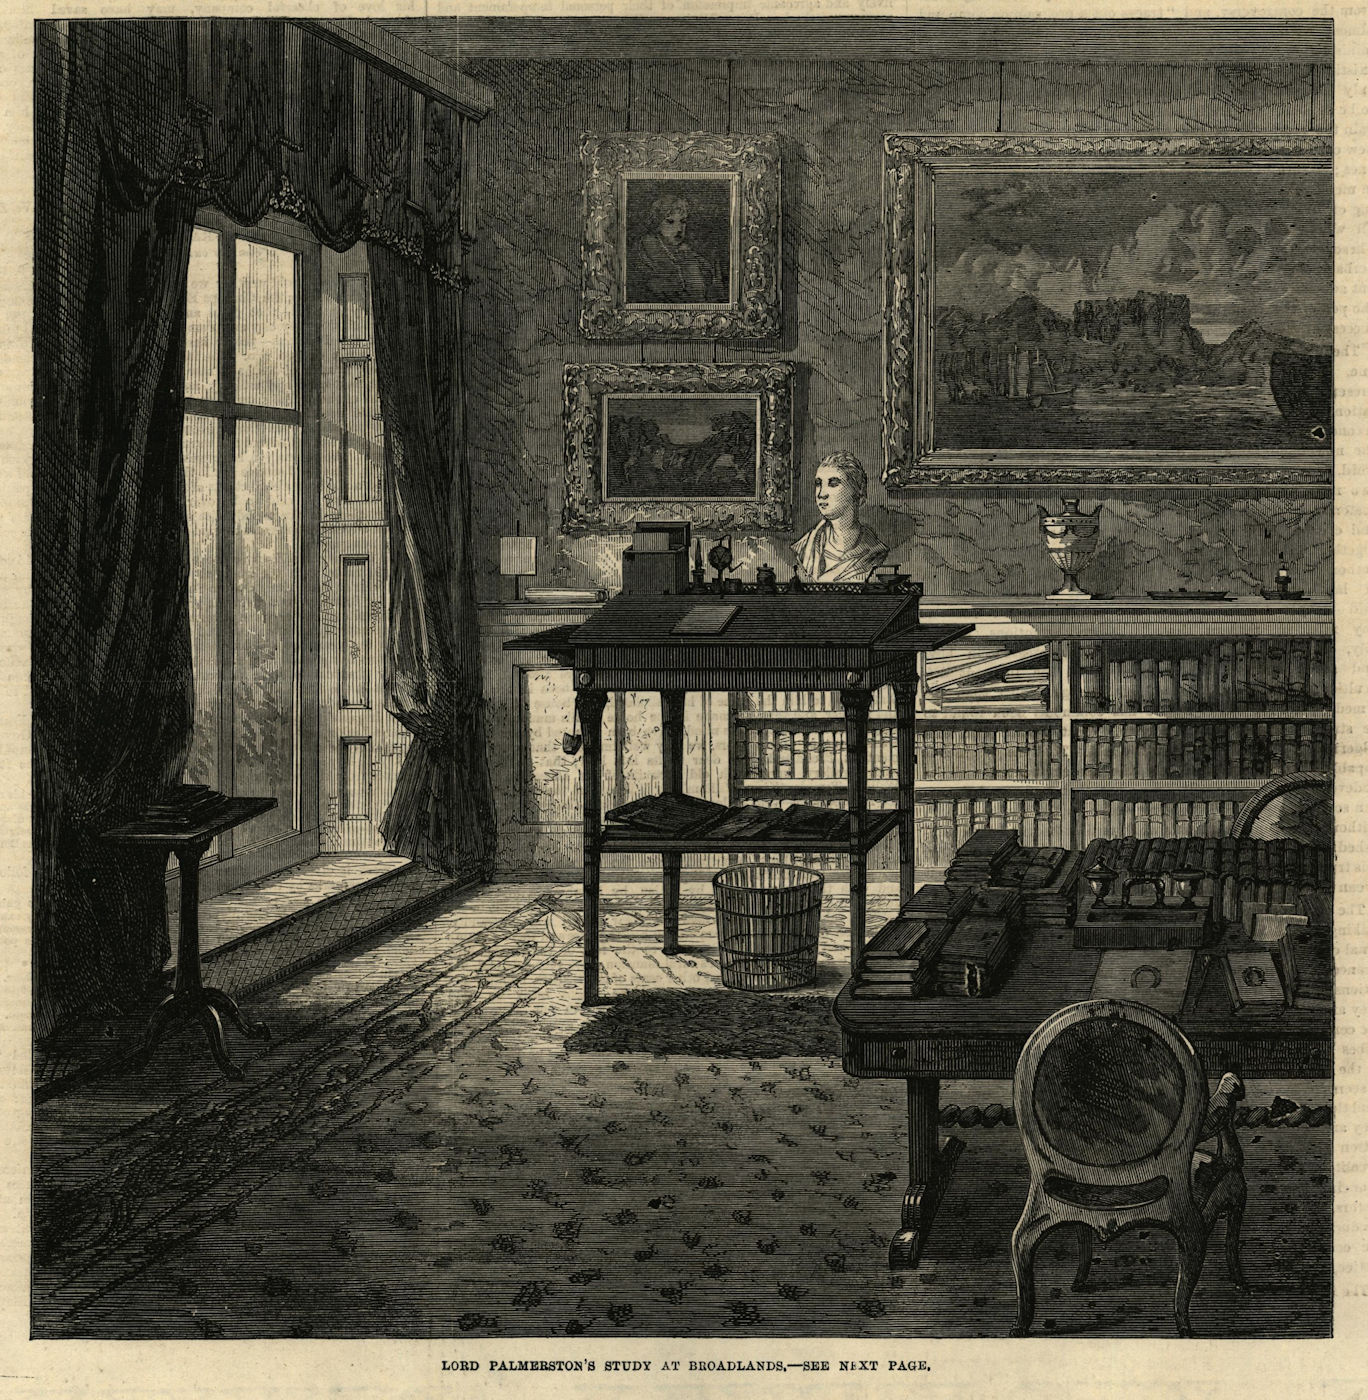 Associate Product Lord Palmerston's study at Broadlands. Hampshire 1865 antique ILN full page